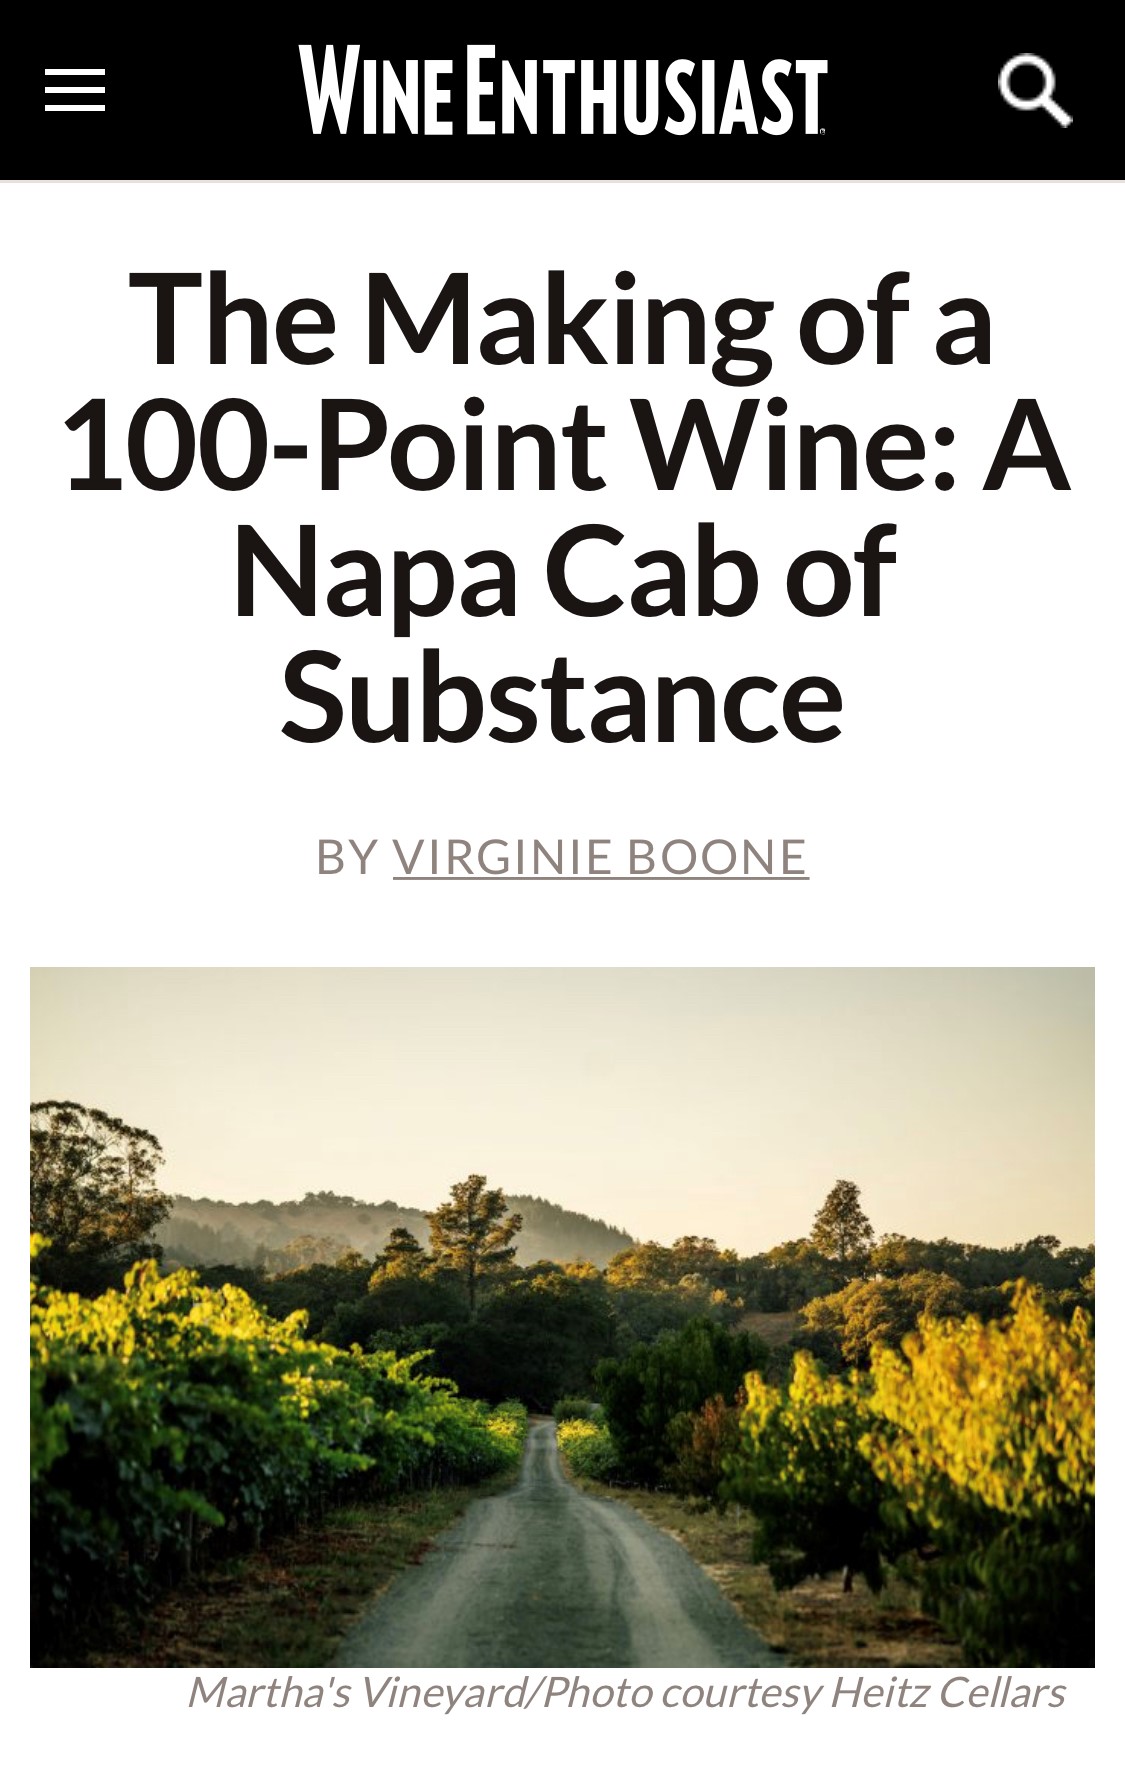 The Making of a 100-Point Wine: A Napa Cab of Substance by Wine Enthusiast